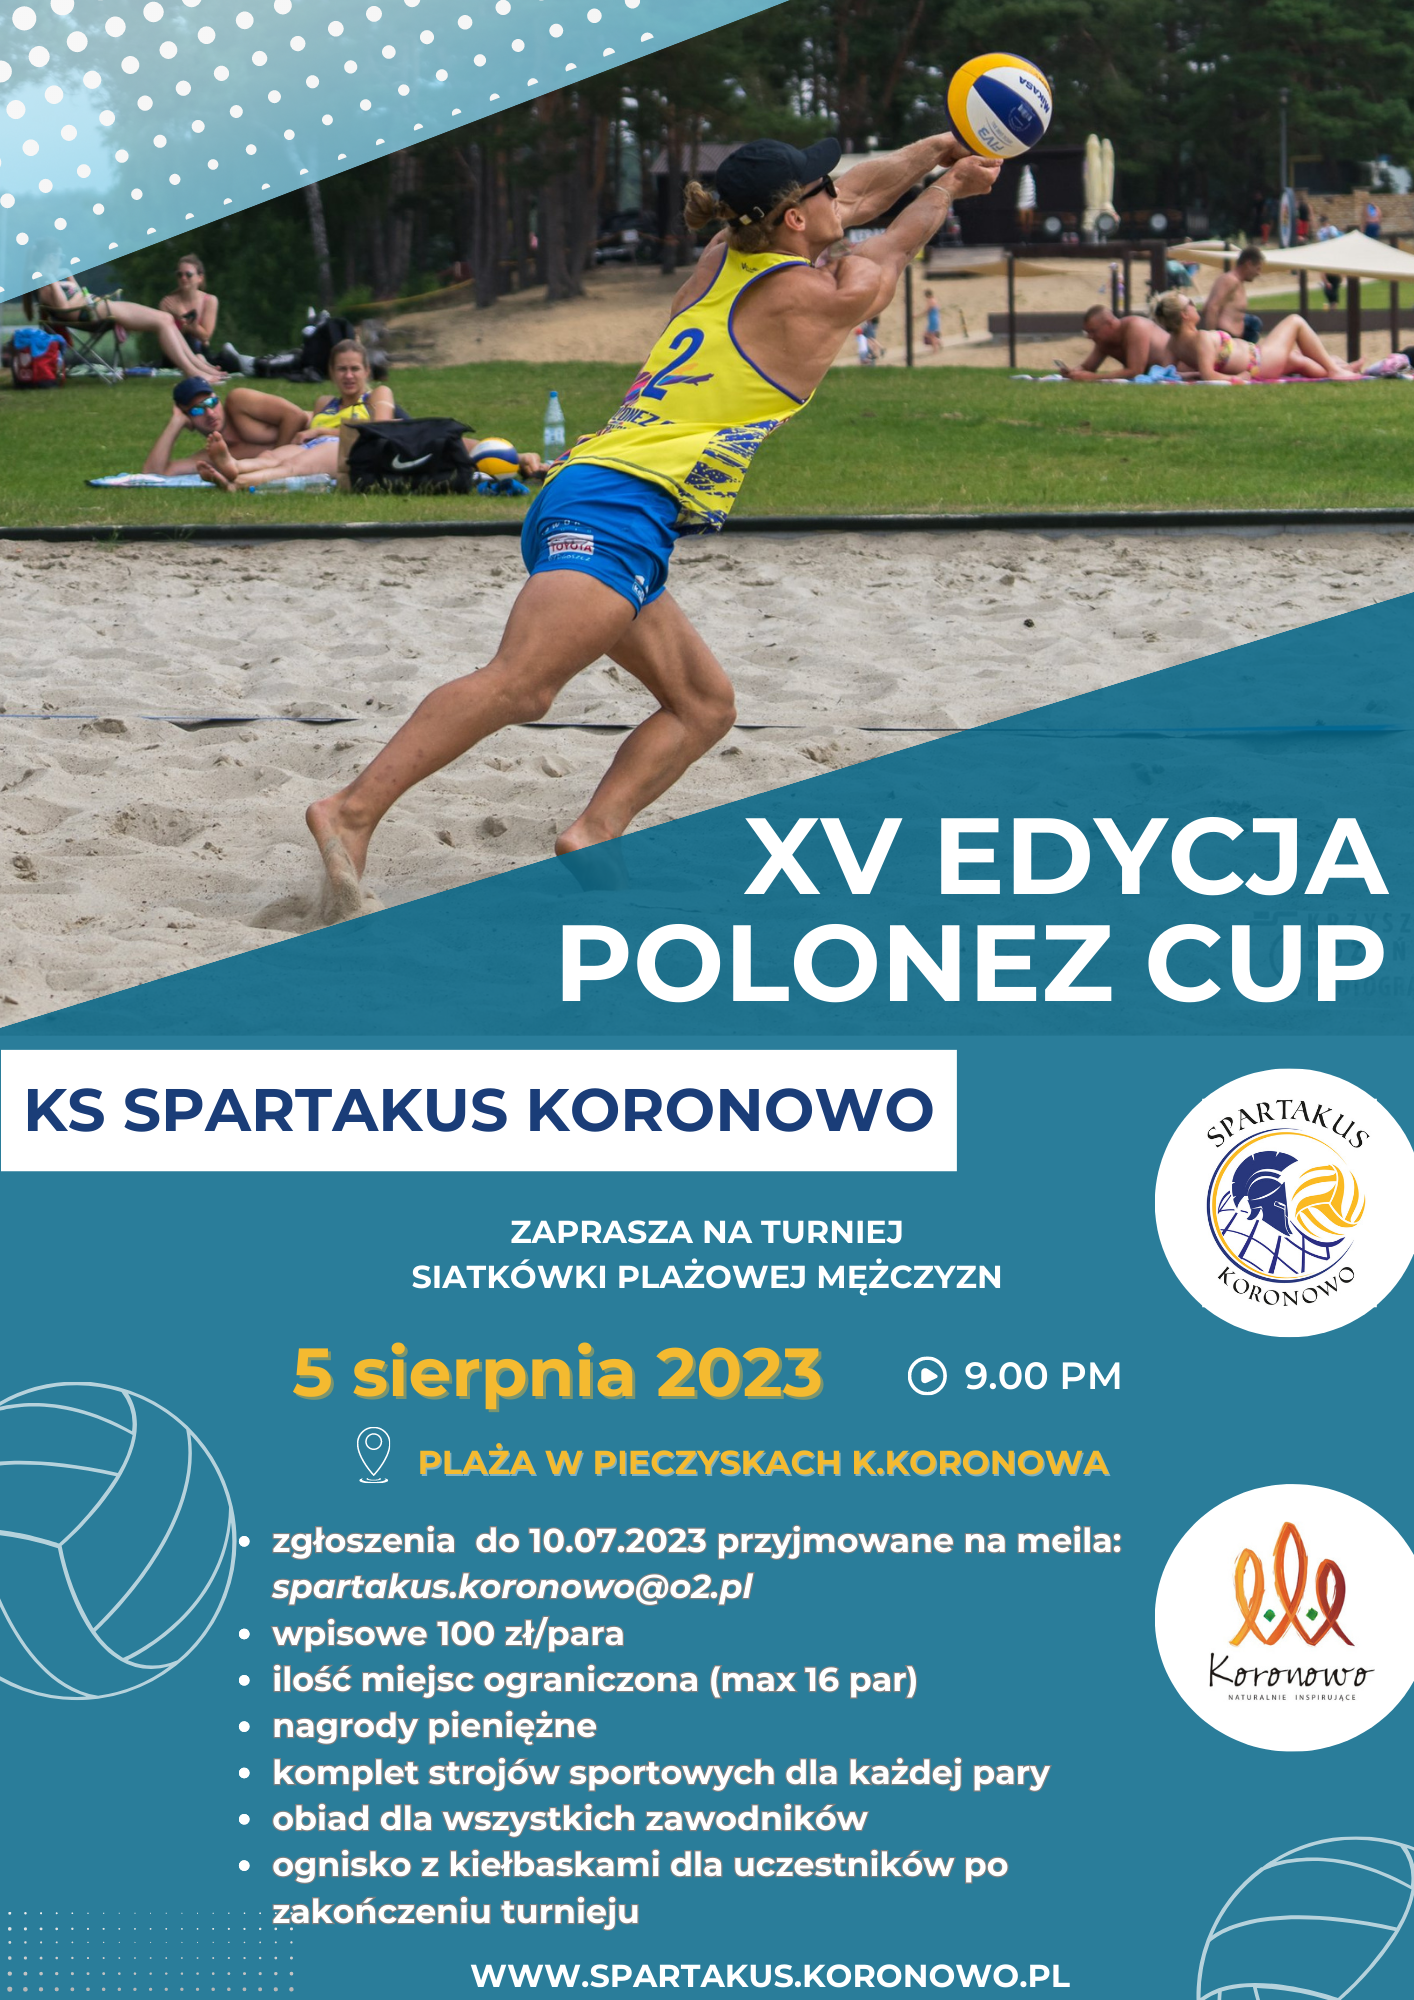 Polonez cup 2023 